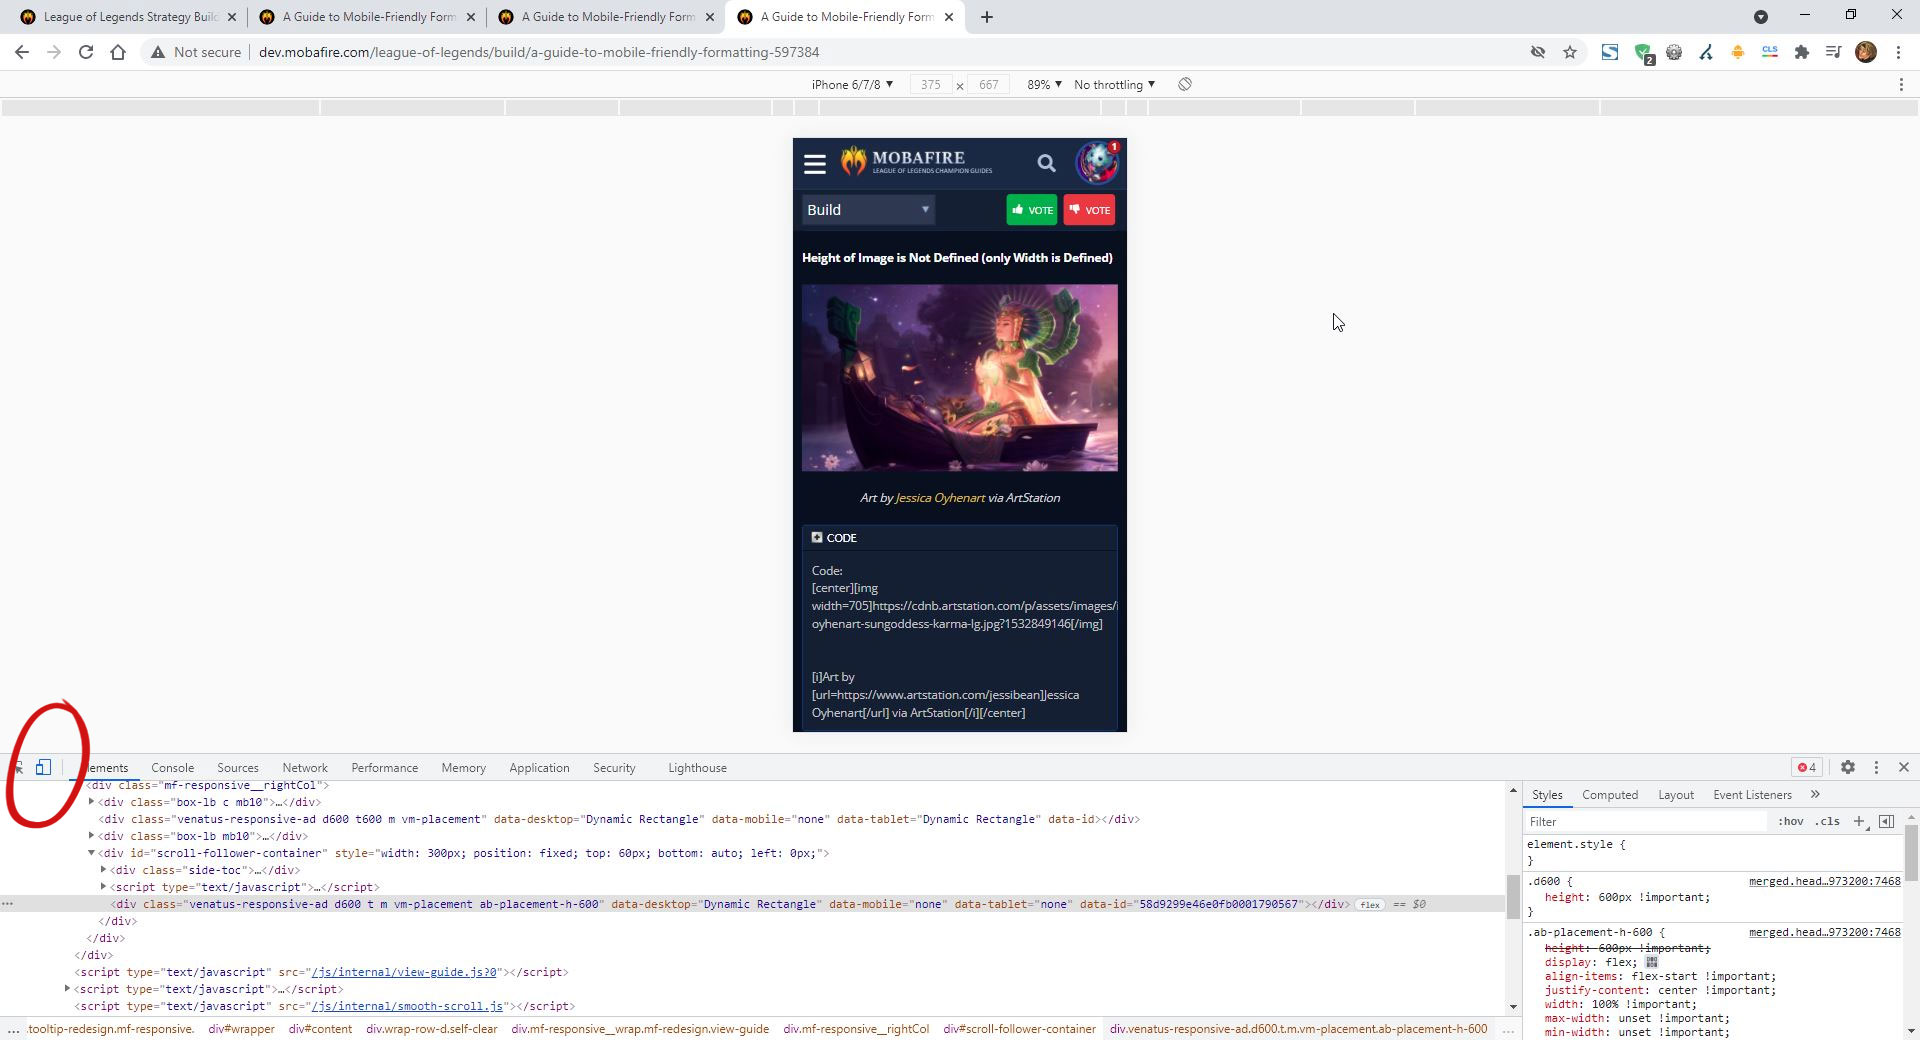 A Guide to Mobile-Friendly Formatting :: League of Legends Strategy Guides